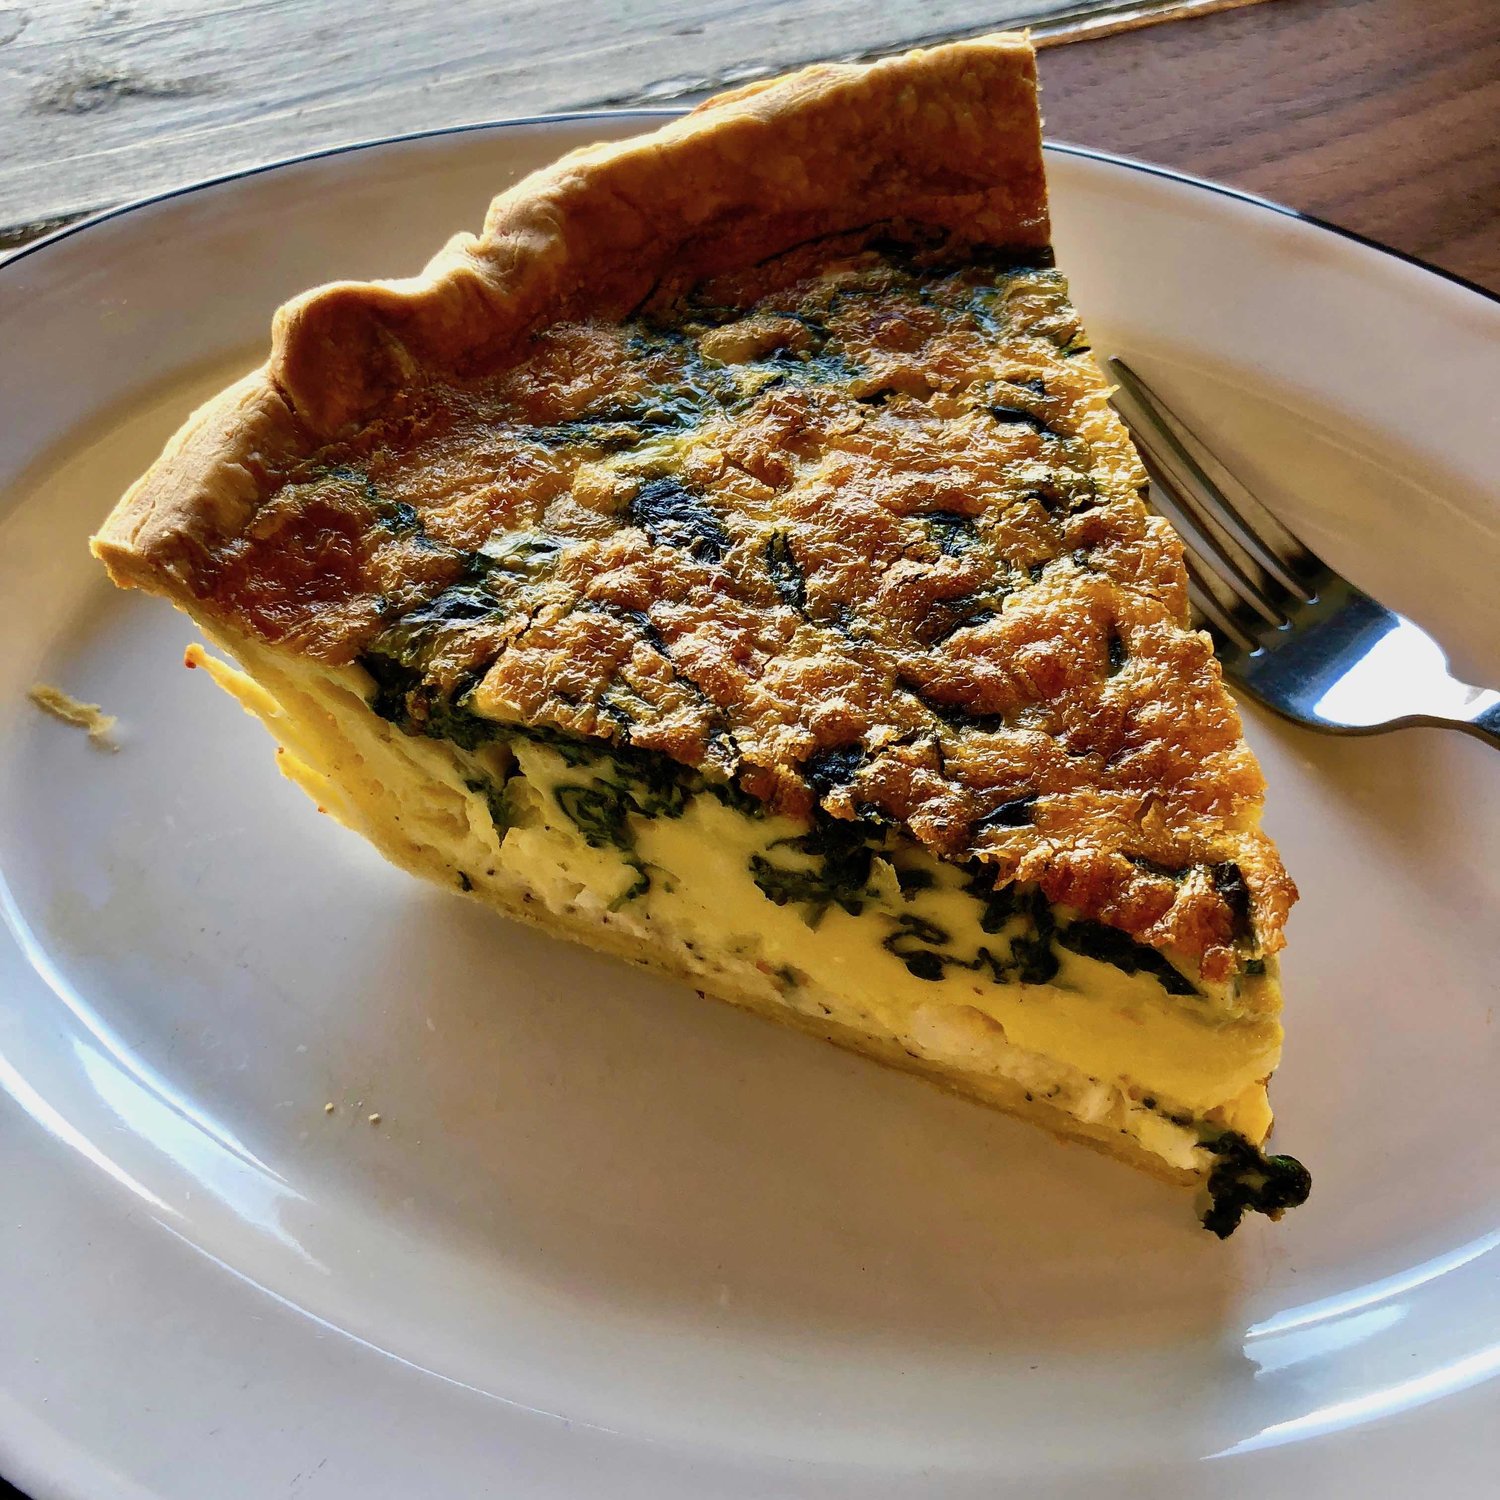 Food and things and brunch quiche!